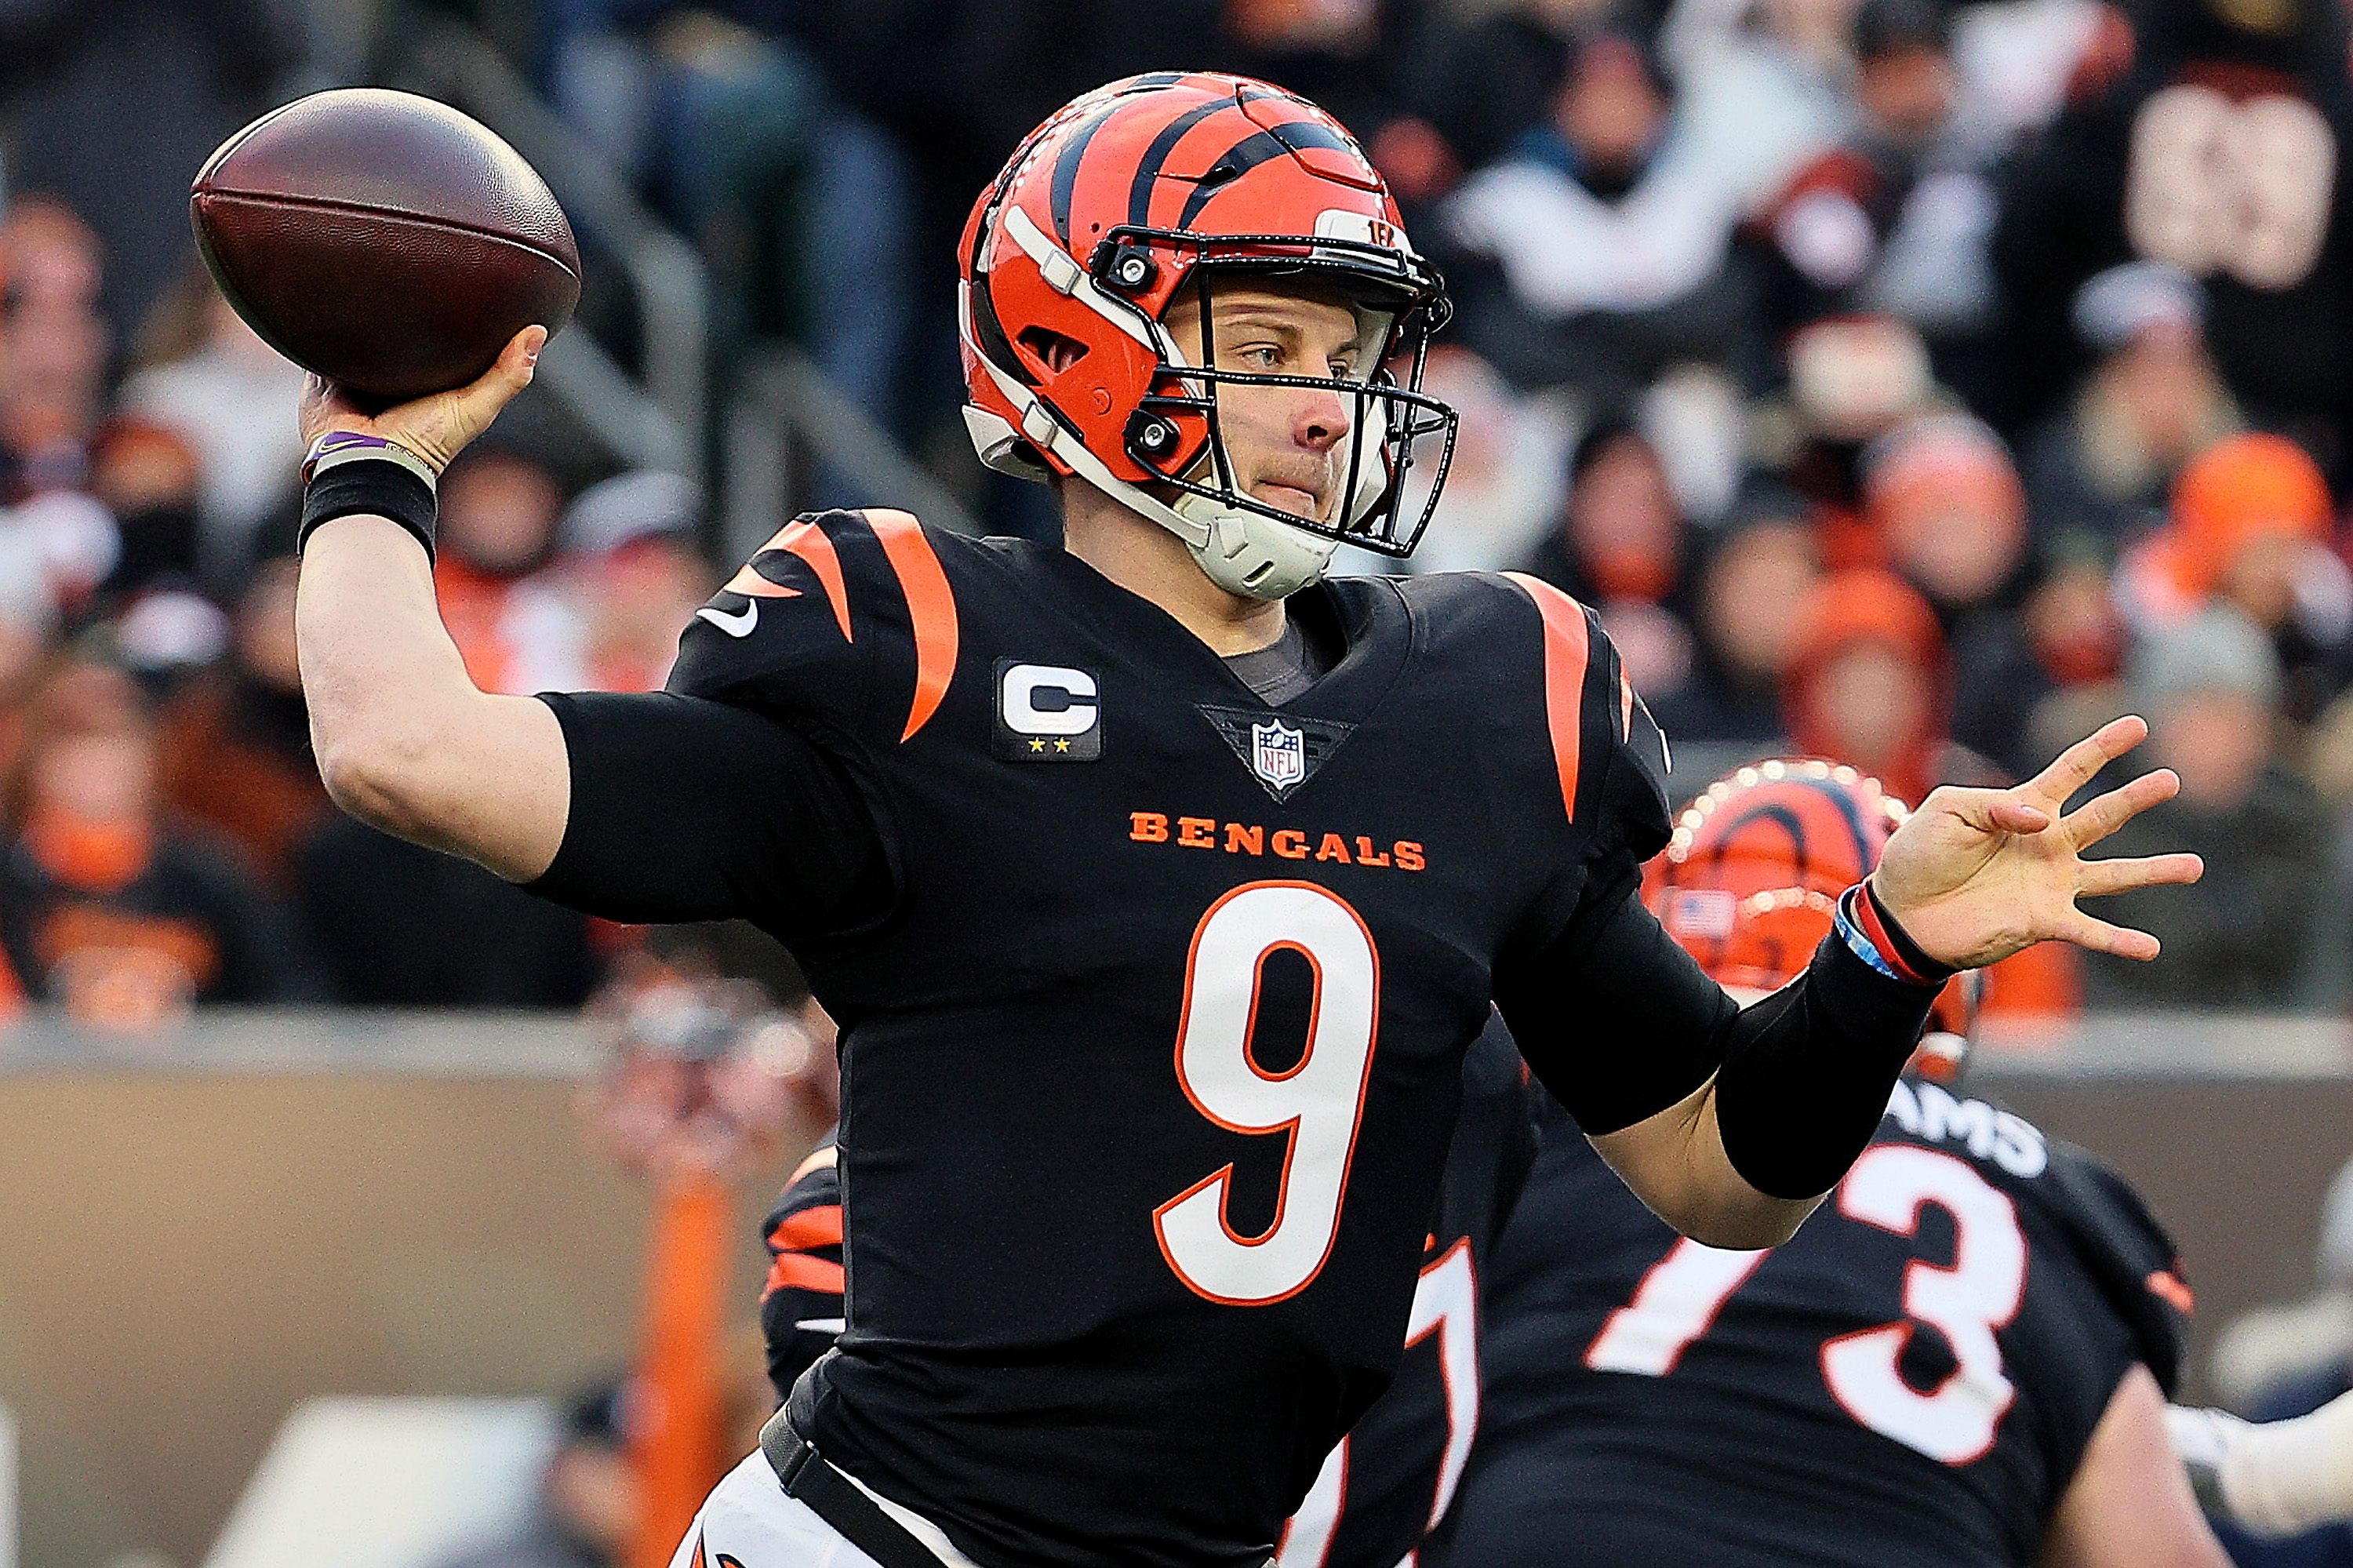 The Bengals are on their way to their first Super Bowl since 1989